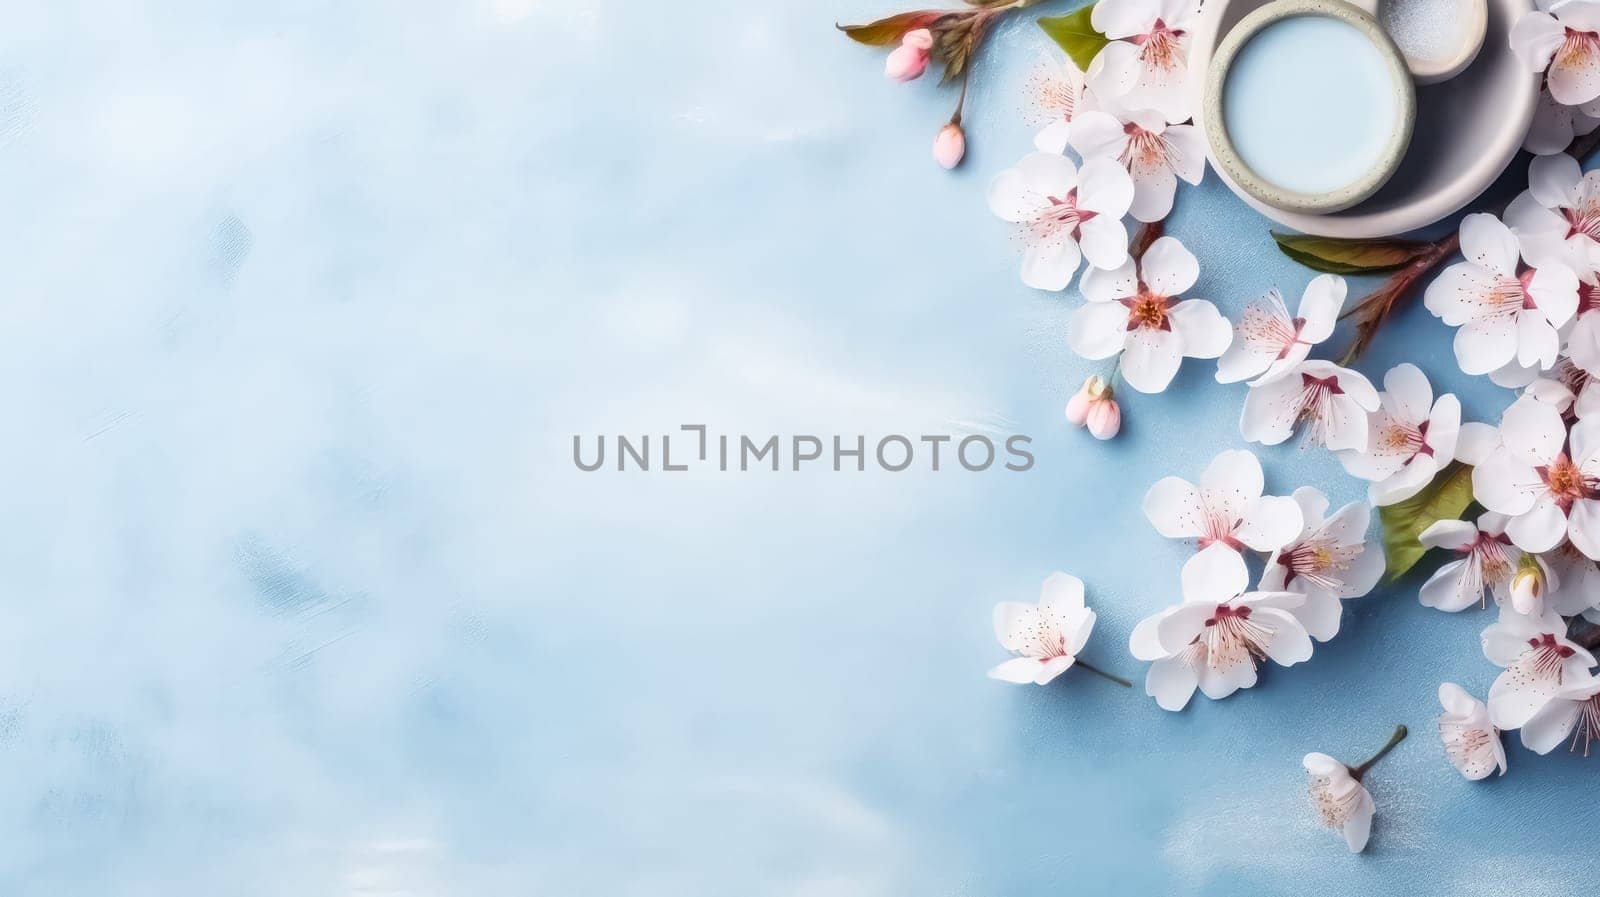 Gorgeous spring cherry branches adorned with delicate white flowers set against a soft light blue background. Petals gently falling, welcoming the beauty of spring. Ample copy space.